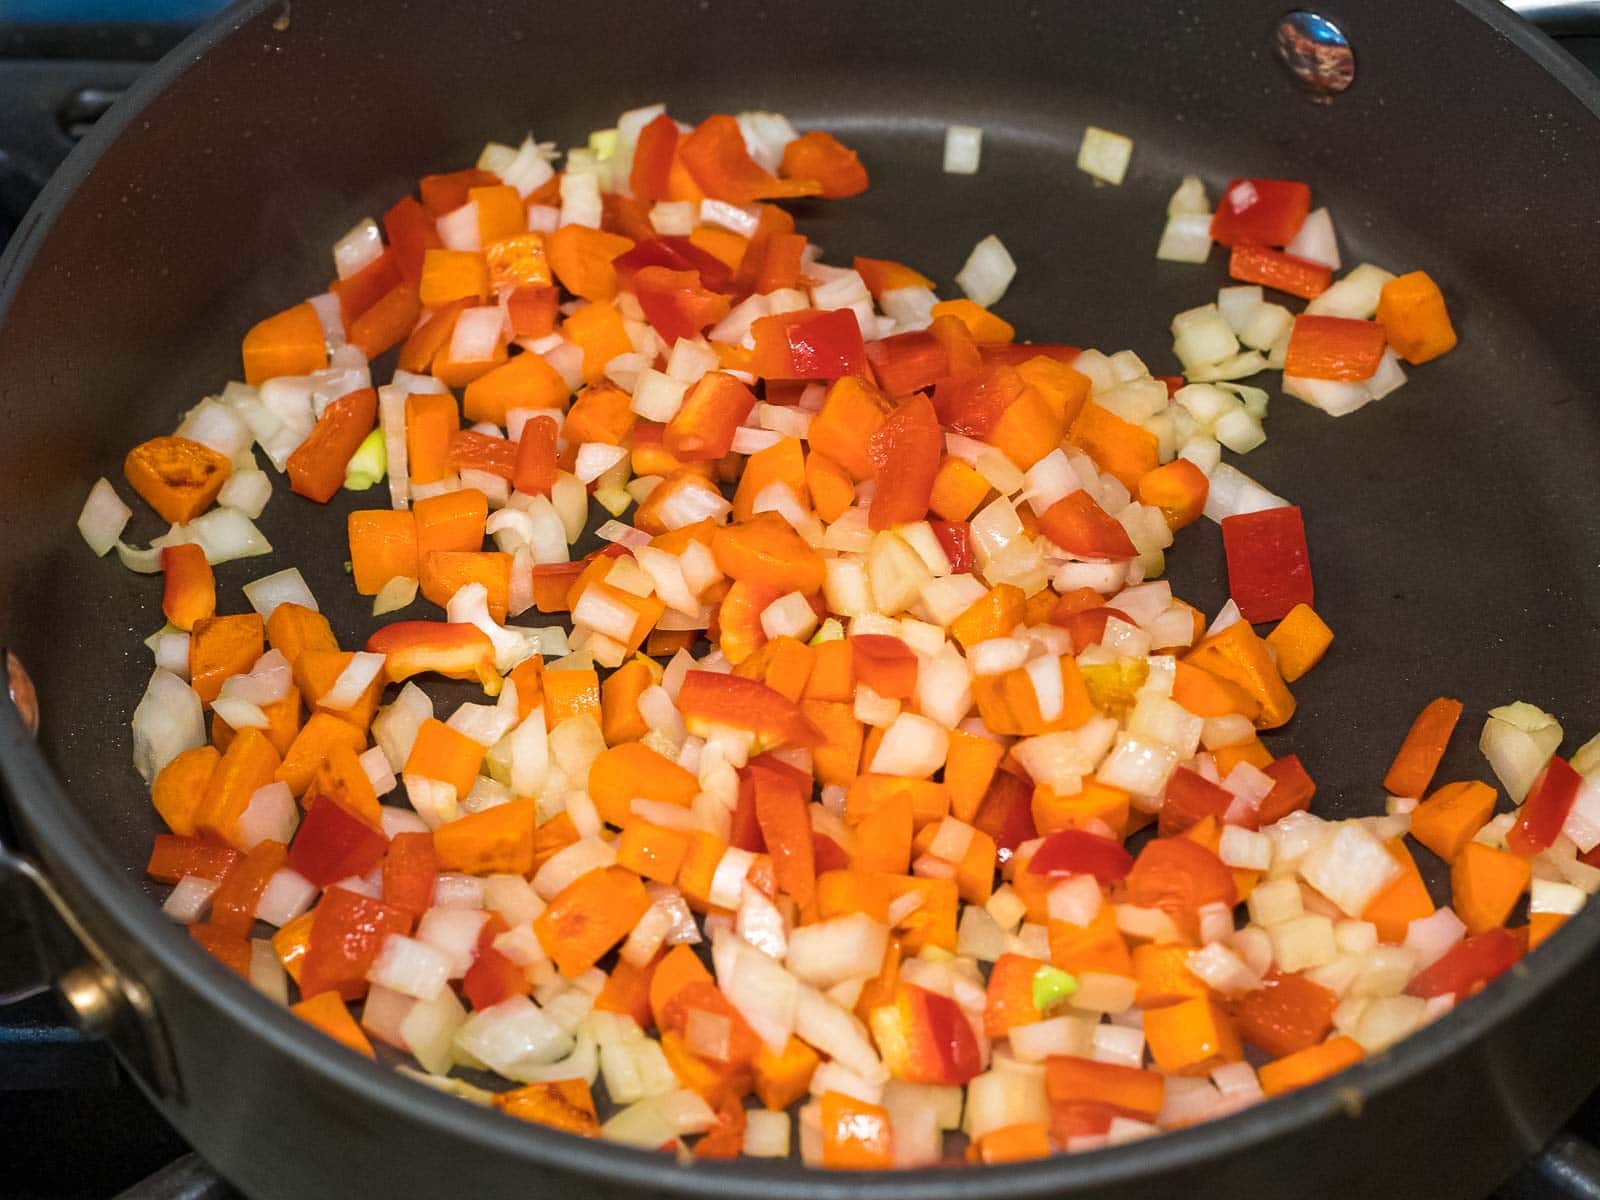 red bell peppers, carrots, and onions stir fried in a pan